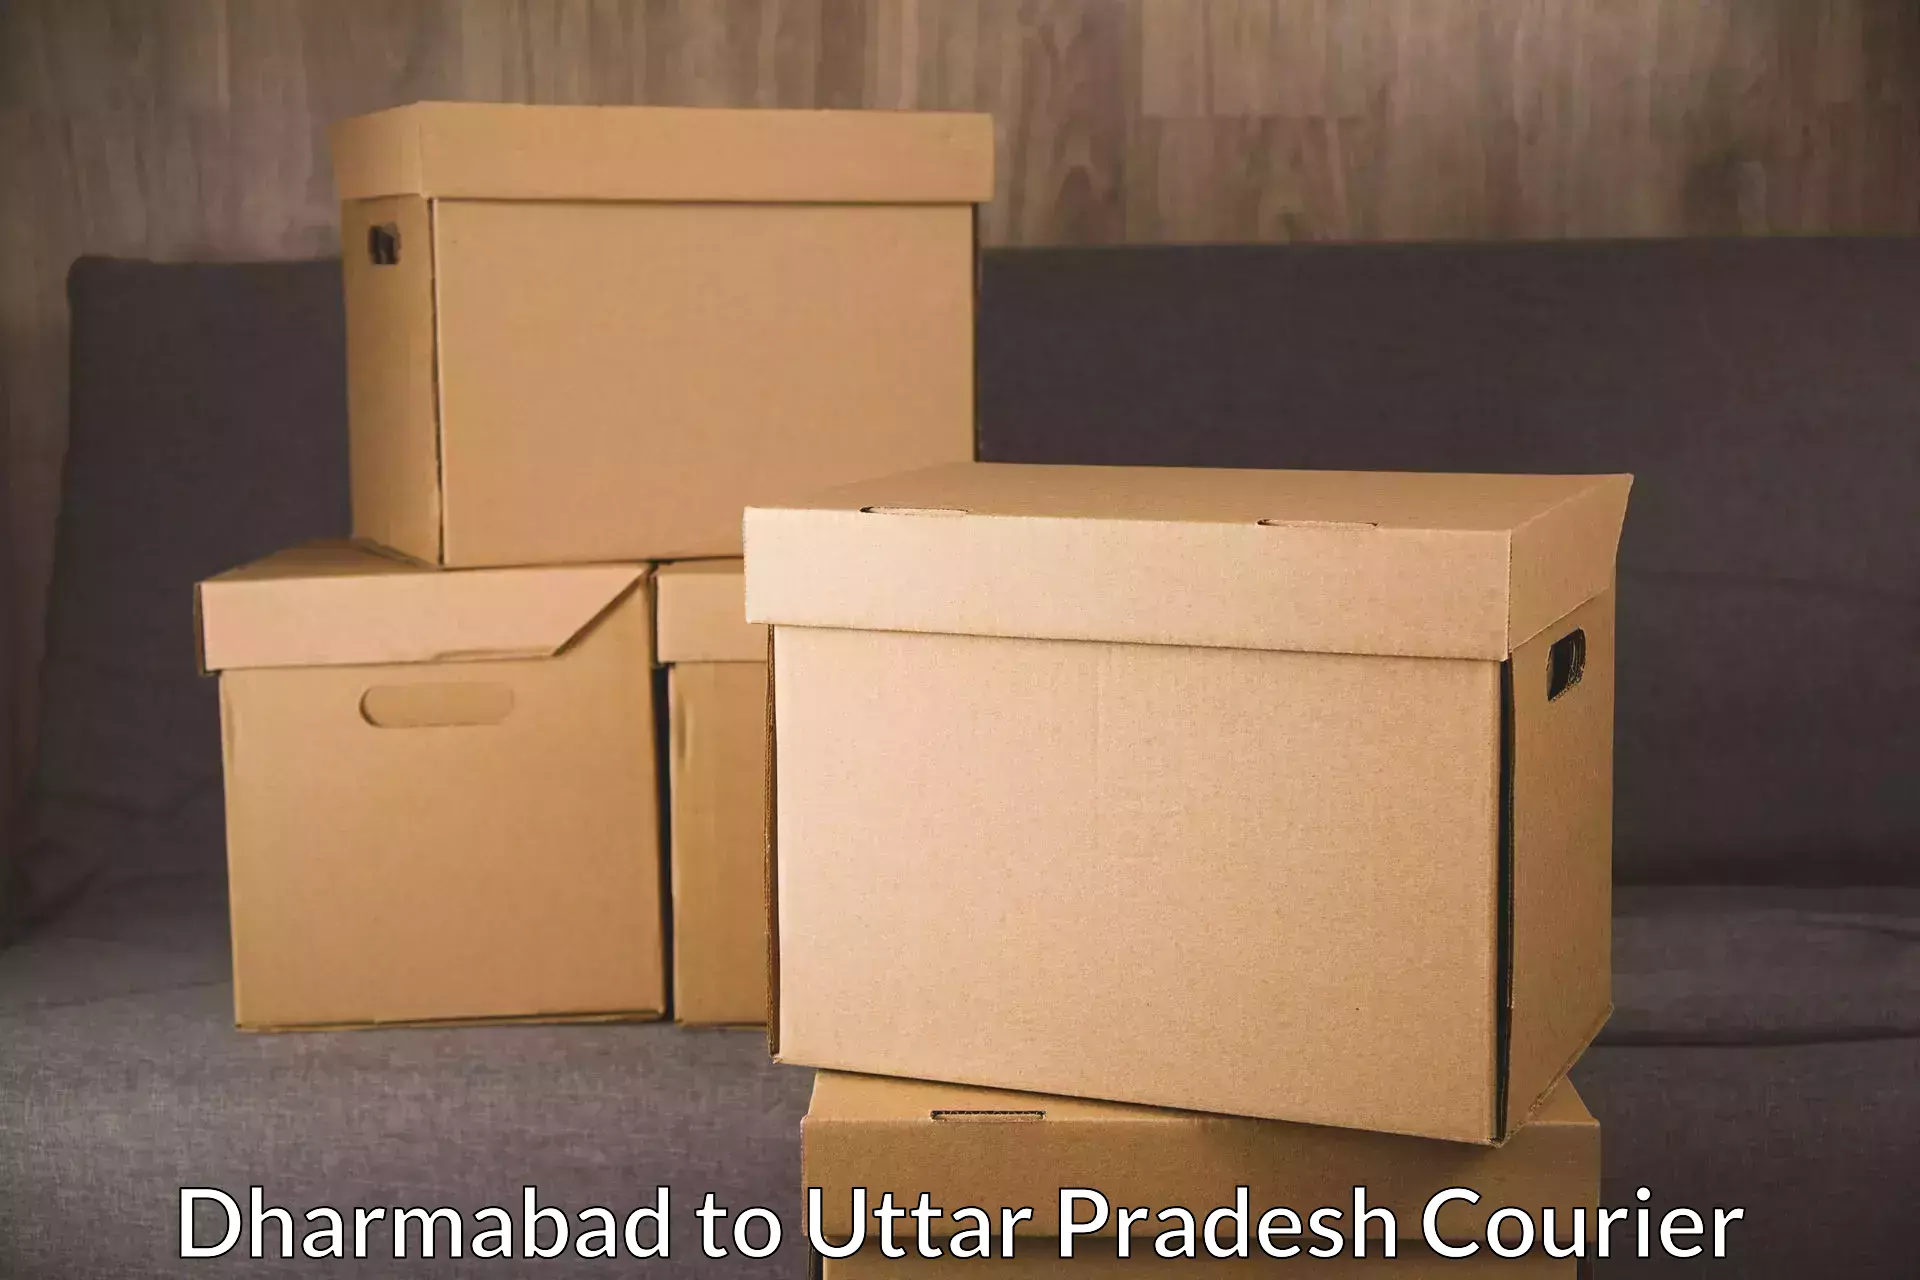 Efficient order fulfillment Dharmabad to Chitrakoot